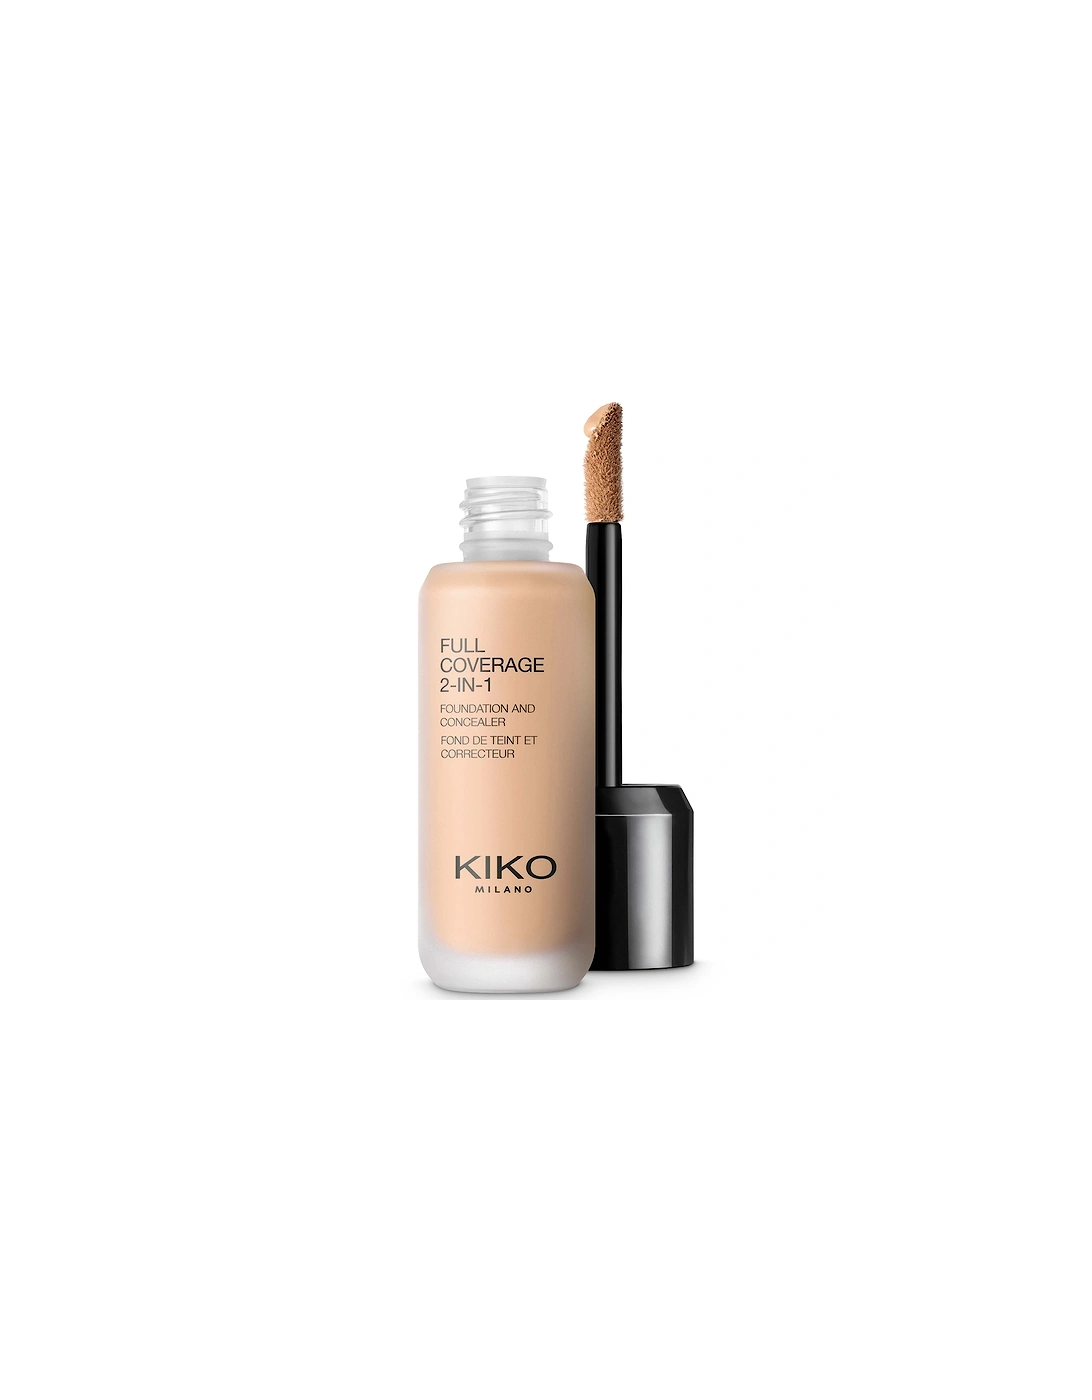 Full Coverage 2-in-1 Foundation and Concealer 25ml - 30 Warm Beige, 2 of 1